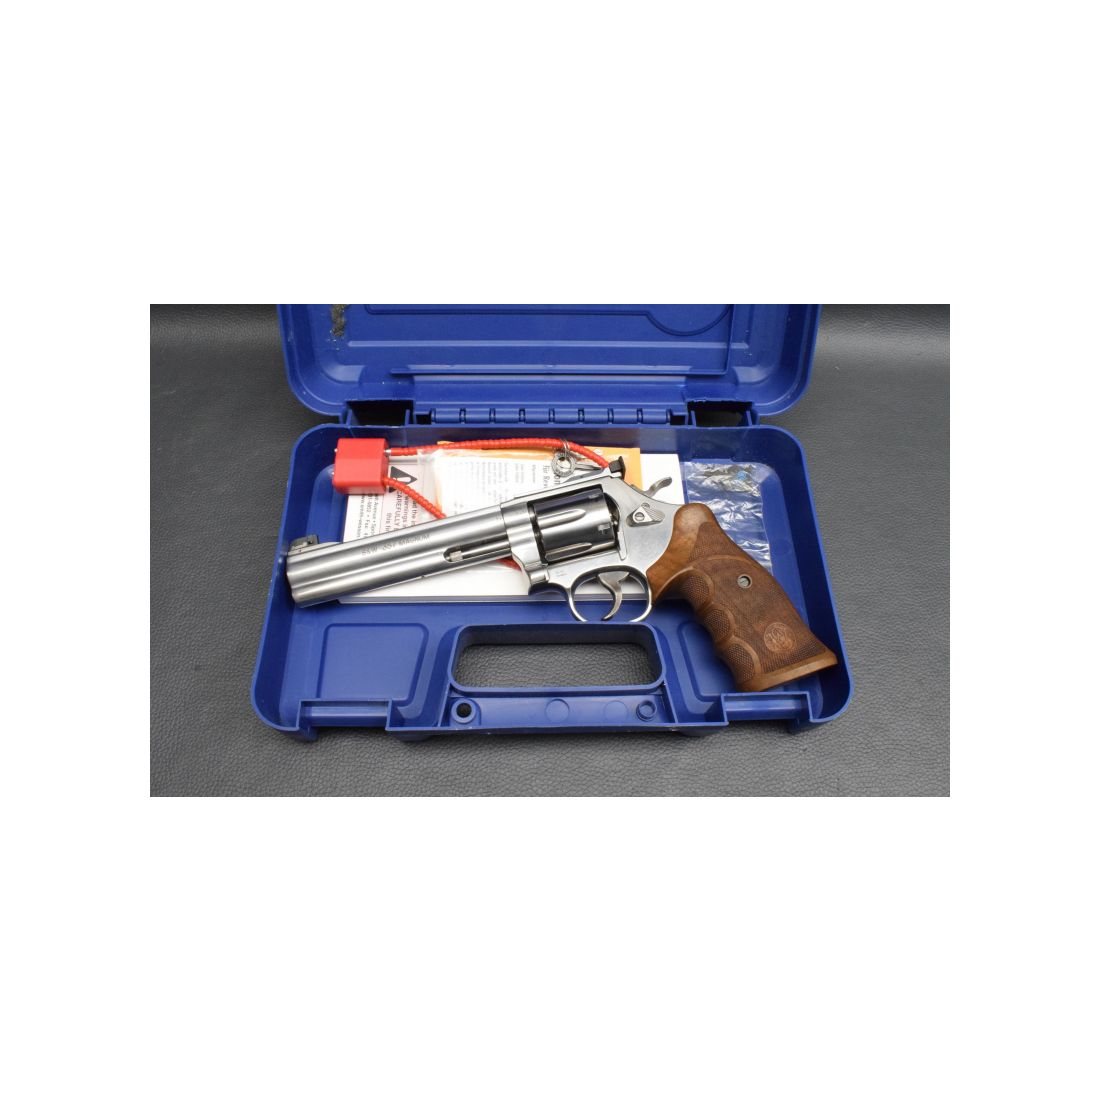 Smith & Wesson Modell 686 DeLuxe Match-Master 357 Magnum, 6" Lauf, sehr gut